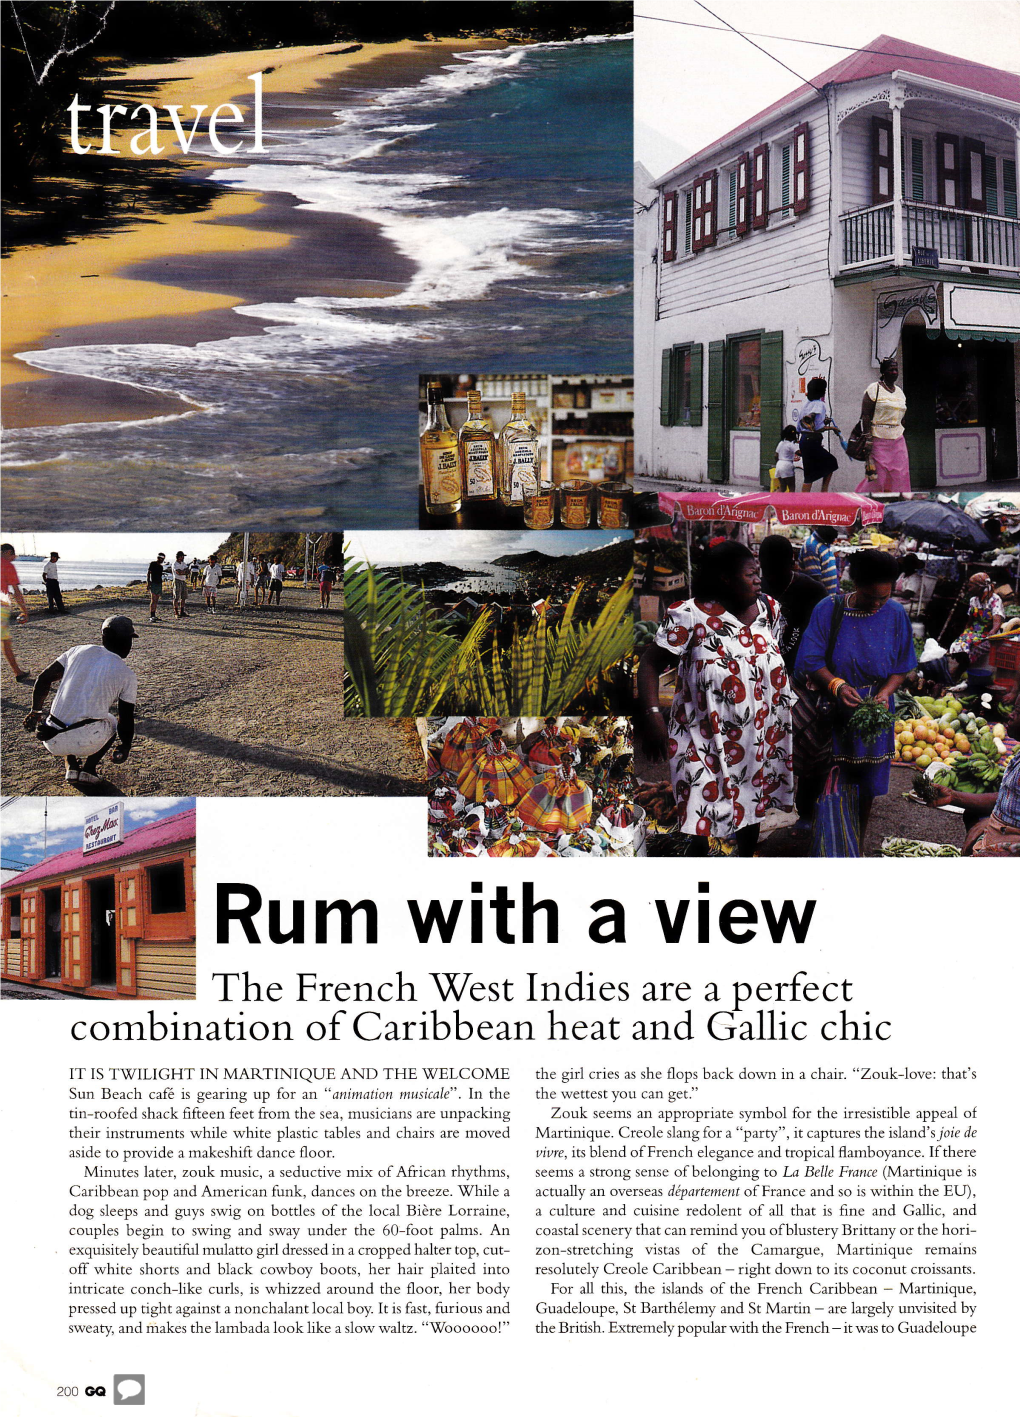 Rum with a View Rc the French West Indies Are Aperfect Combination of Caribbean Heat and G^Allic Chic